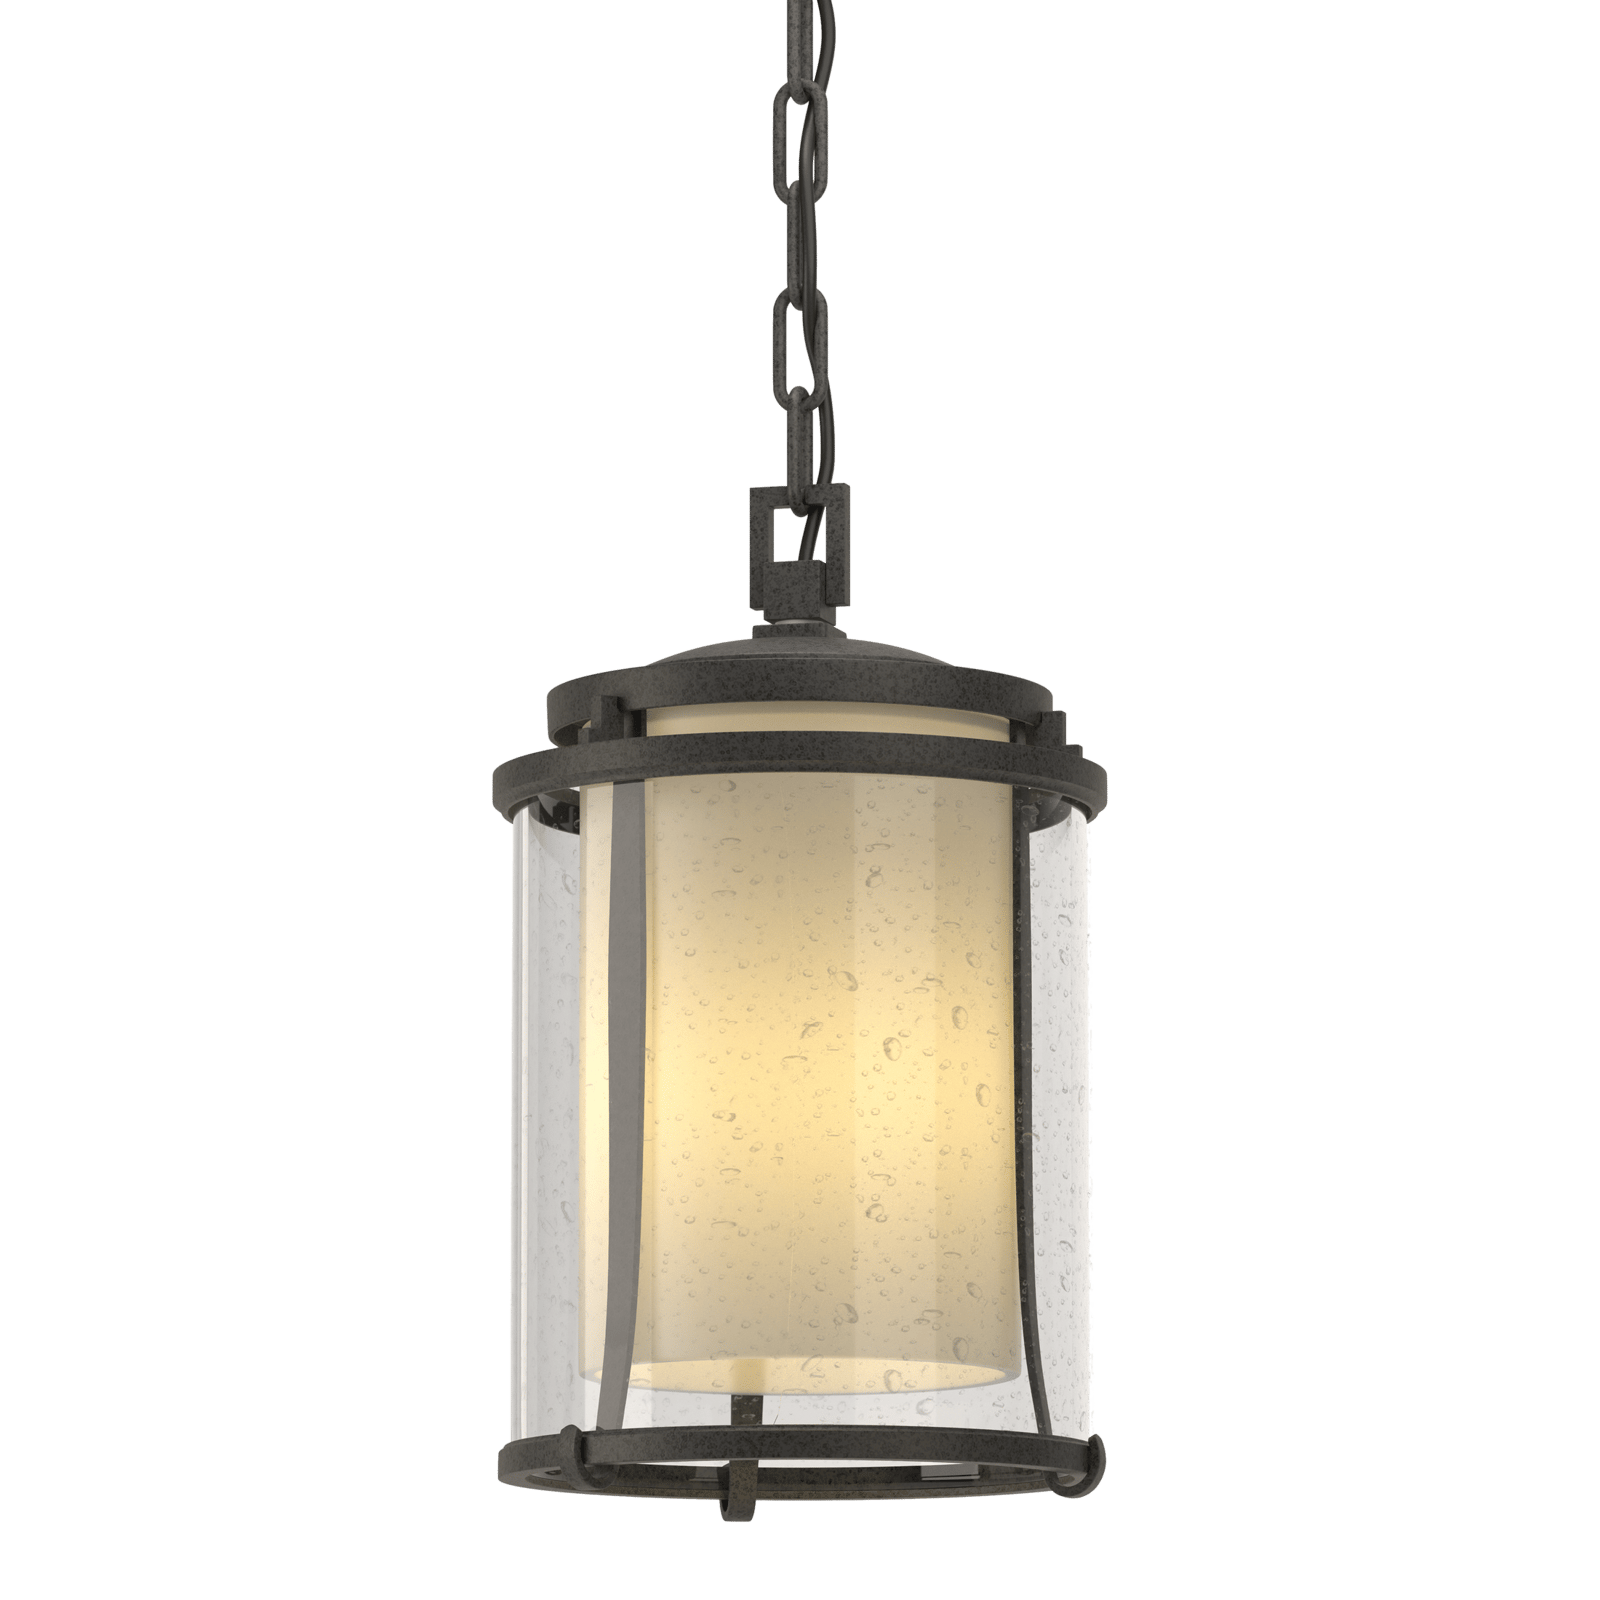 Hubbardton Forge Meridian Outdoor Ceiling Fixture Outdoor l Wall Hubbardton Forge Coastal Natural Iron Seeded Glass with Opal Diffuser (ZS) 